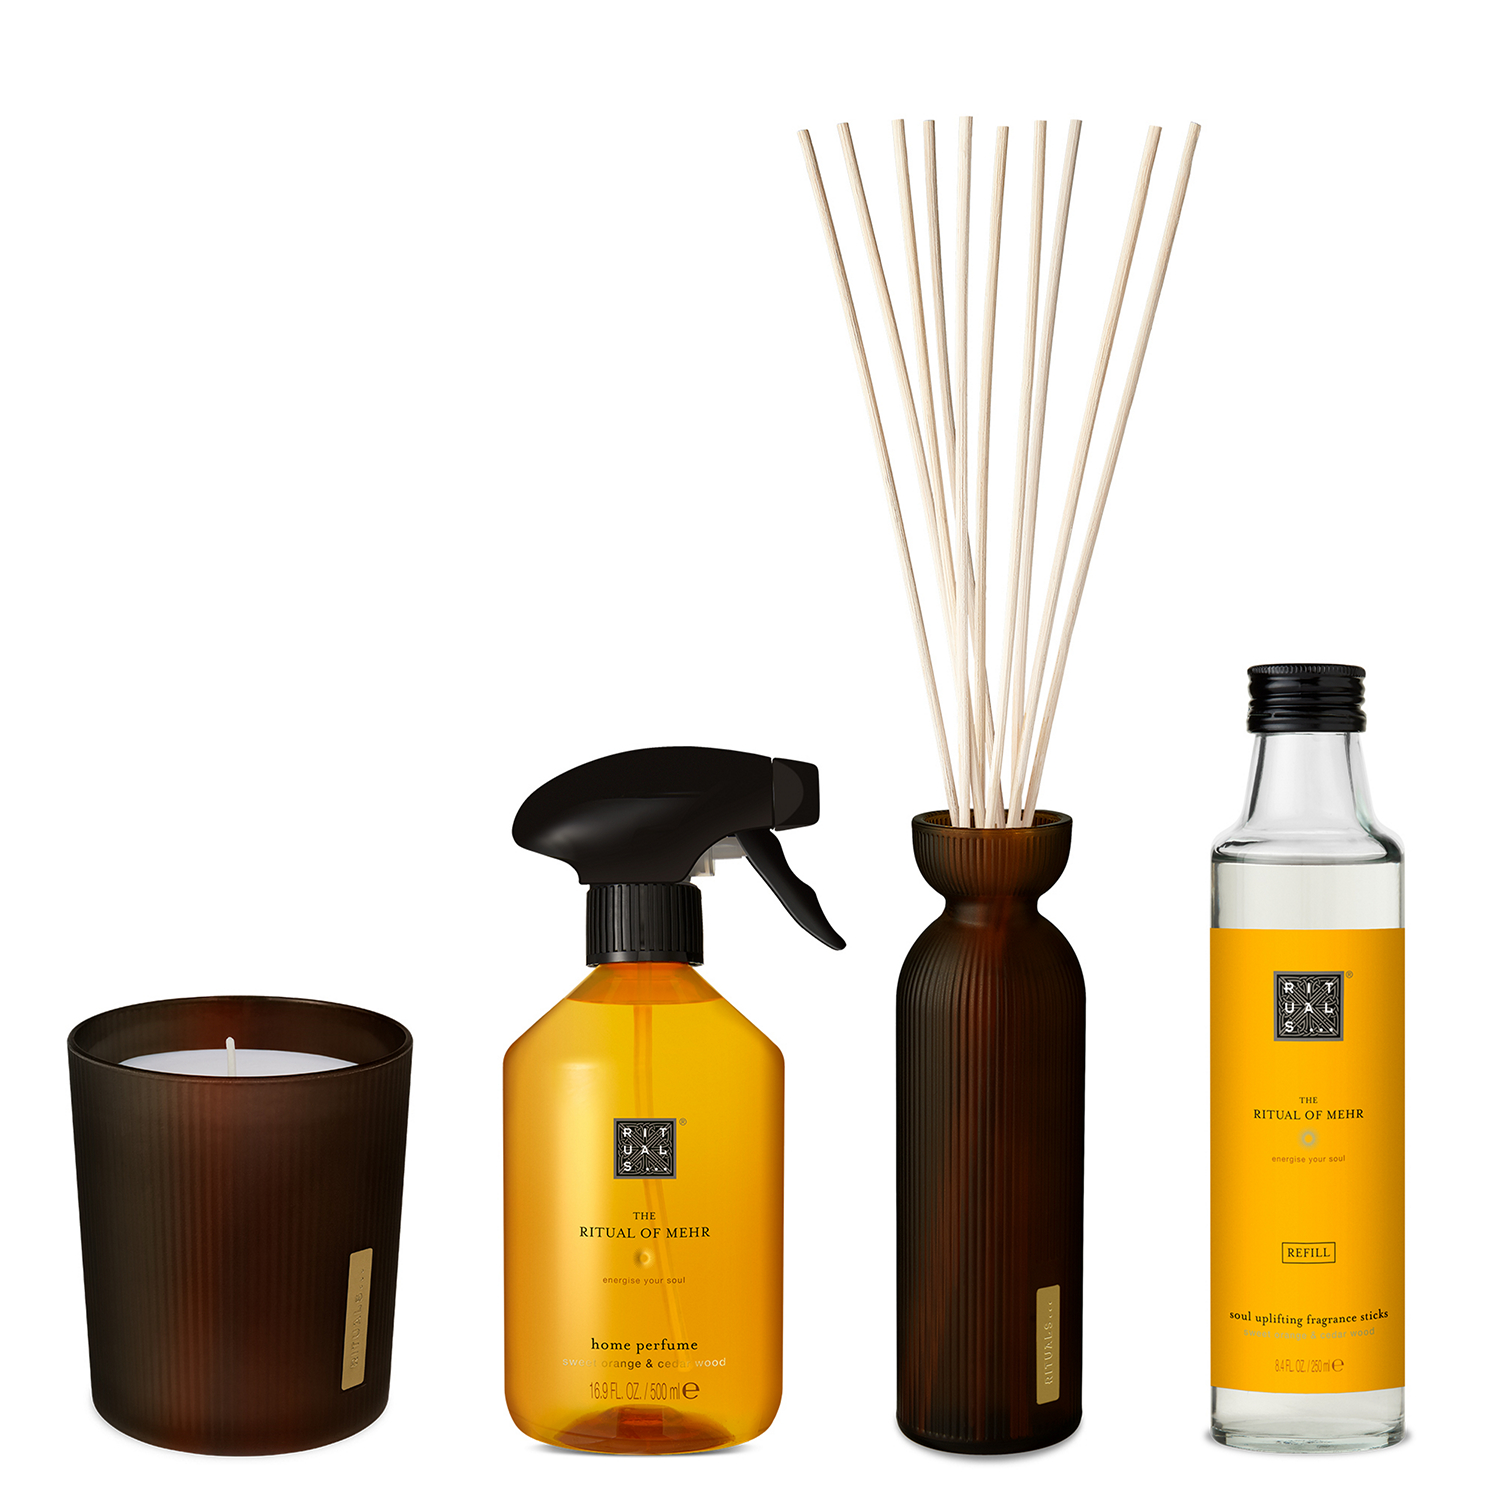 RITUALS The Ritual of Mehr Home Fragrance Collection